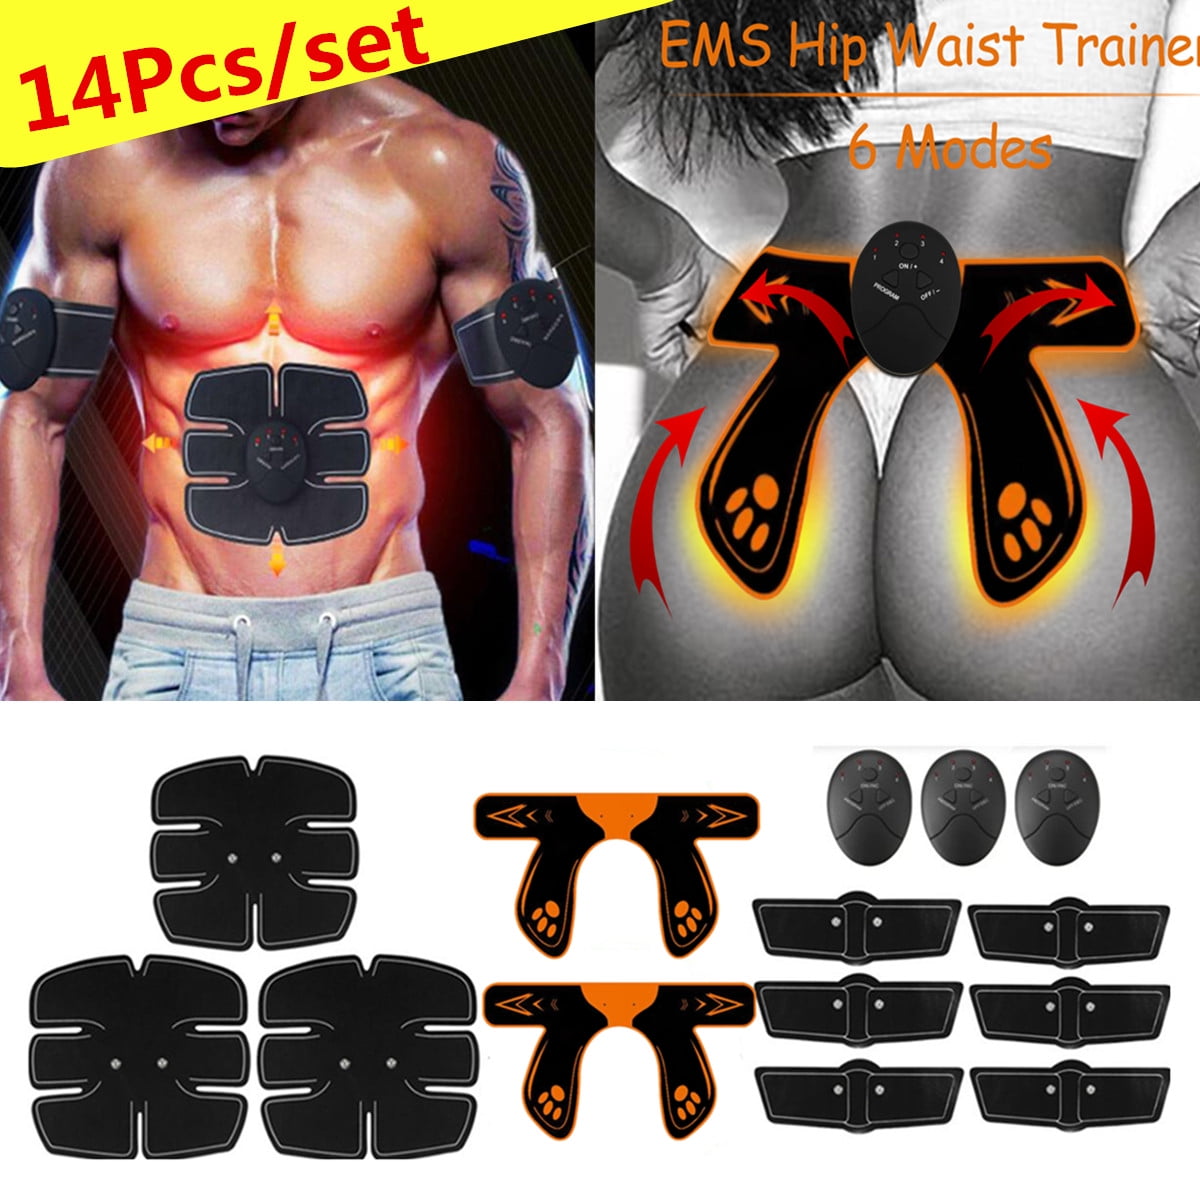 EMS Smart Hip & Waist Trainer Buttocks Butt Lifting Muscle Fitness to US 6 Modes 